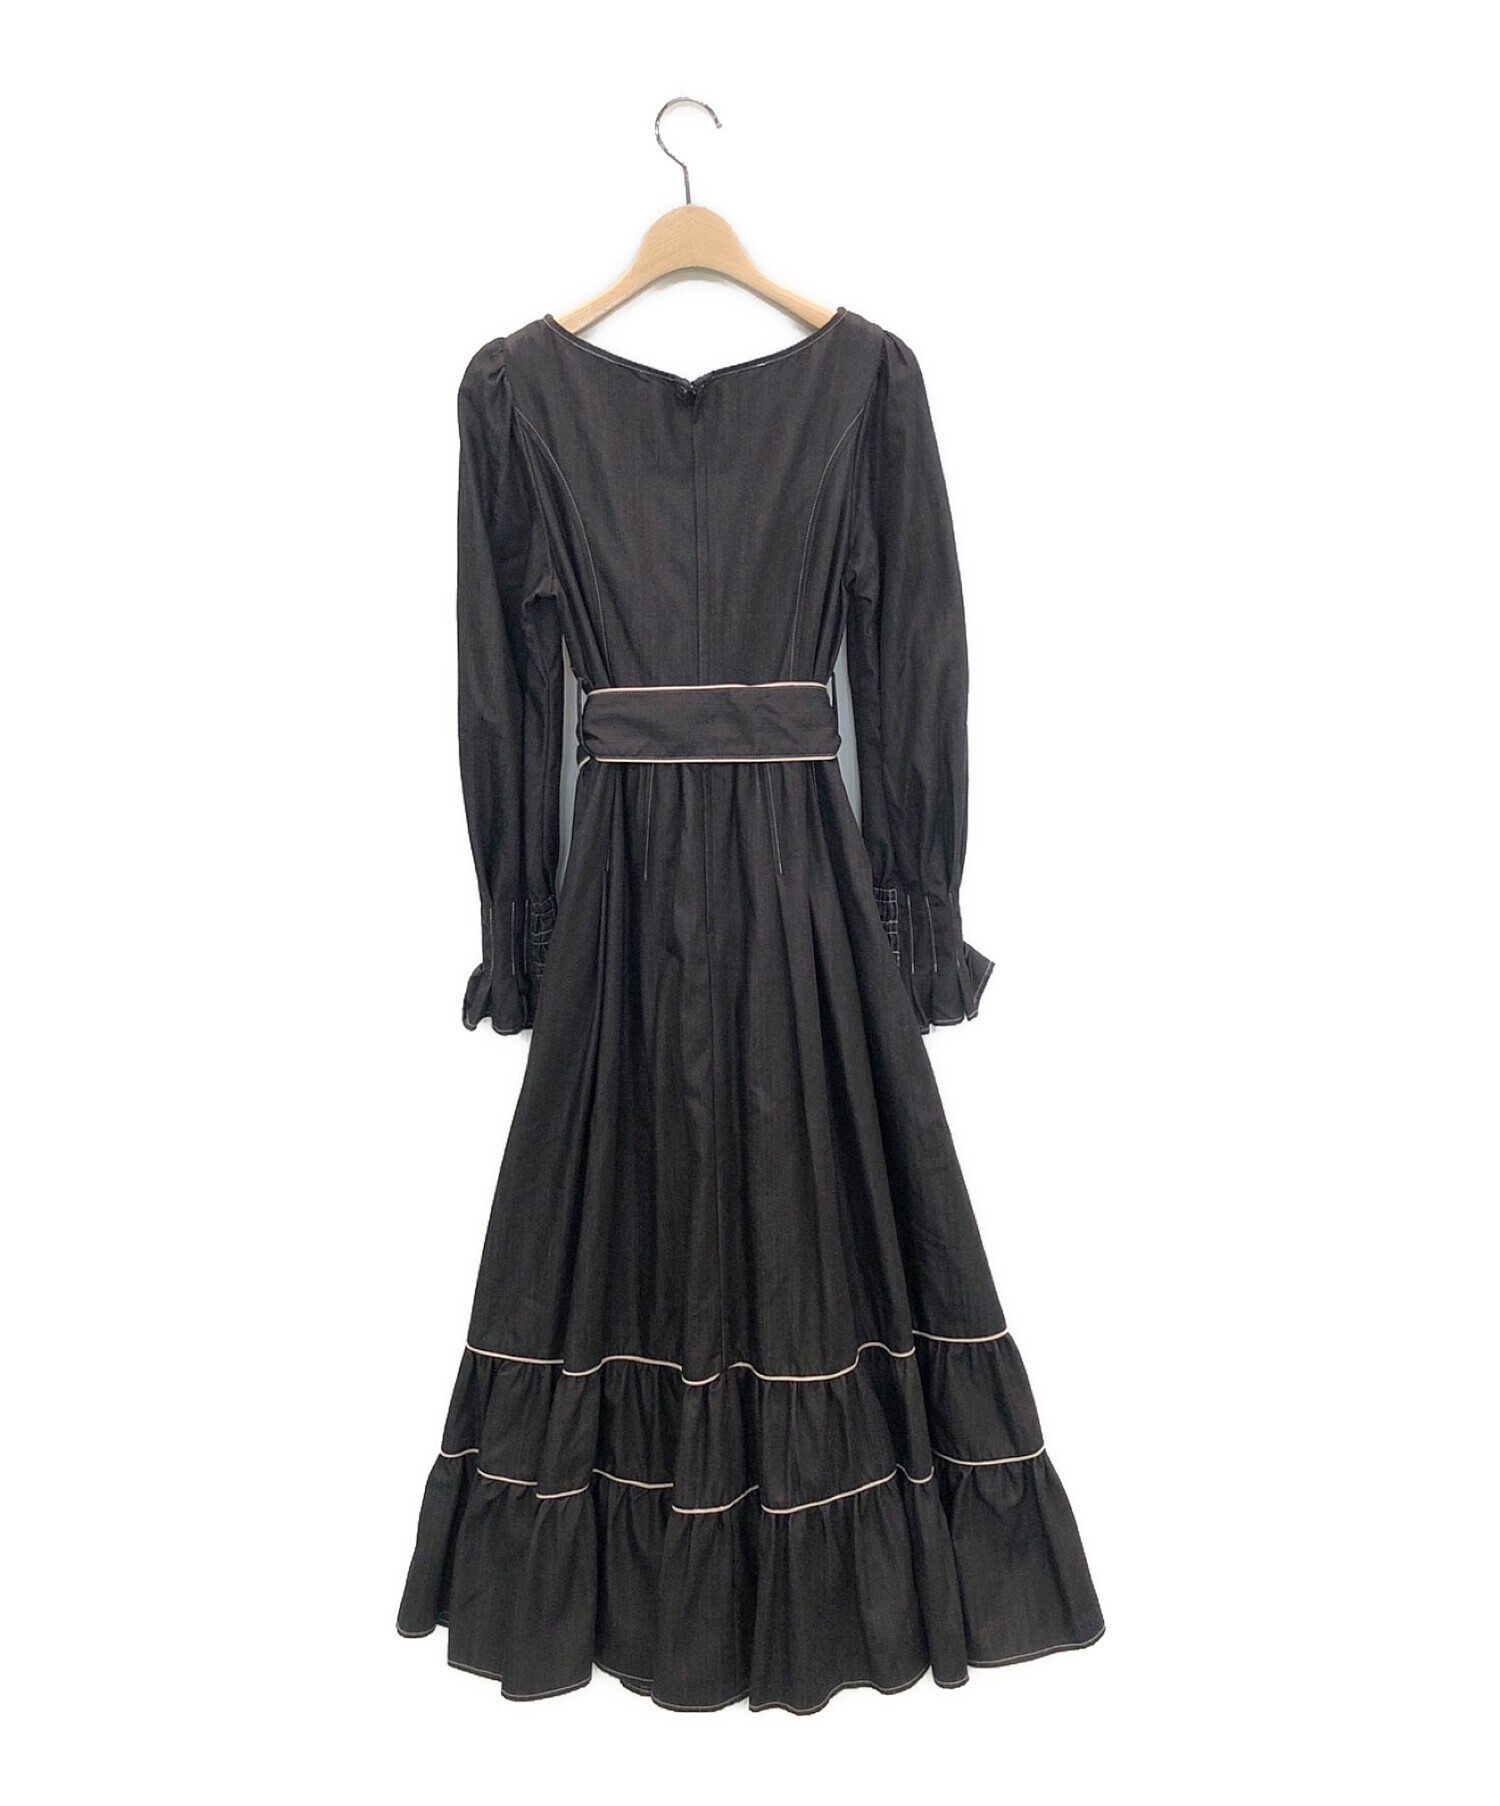 Herlipto Signs of Autumn Belted Dress - ワンピース